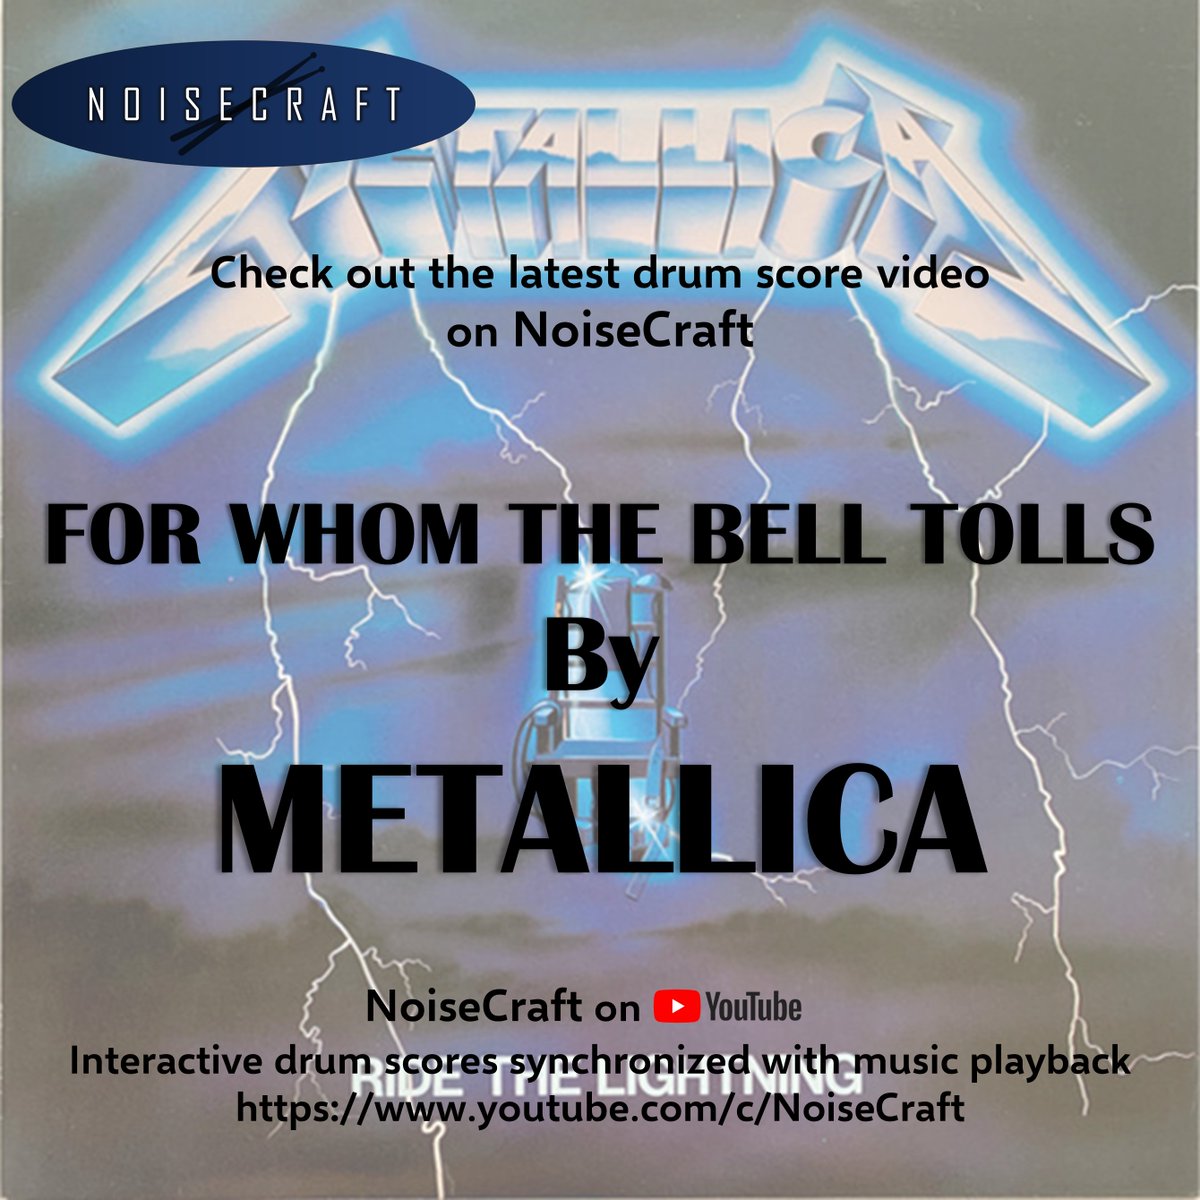 Check out the latest drum sheet video on NoiseCraft: Metallica - For Whom the Bell Tolls Drum Score with music playback ! 
youtu.be/3XYpZS0r1rc 

#metallica #forwhomthebelltolls #ridethelightning #larsulrich #NOiSECRAFT #drumcover #drumvideo #metaldrummer #drums #drummer